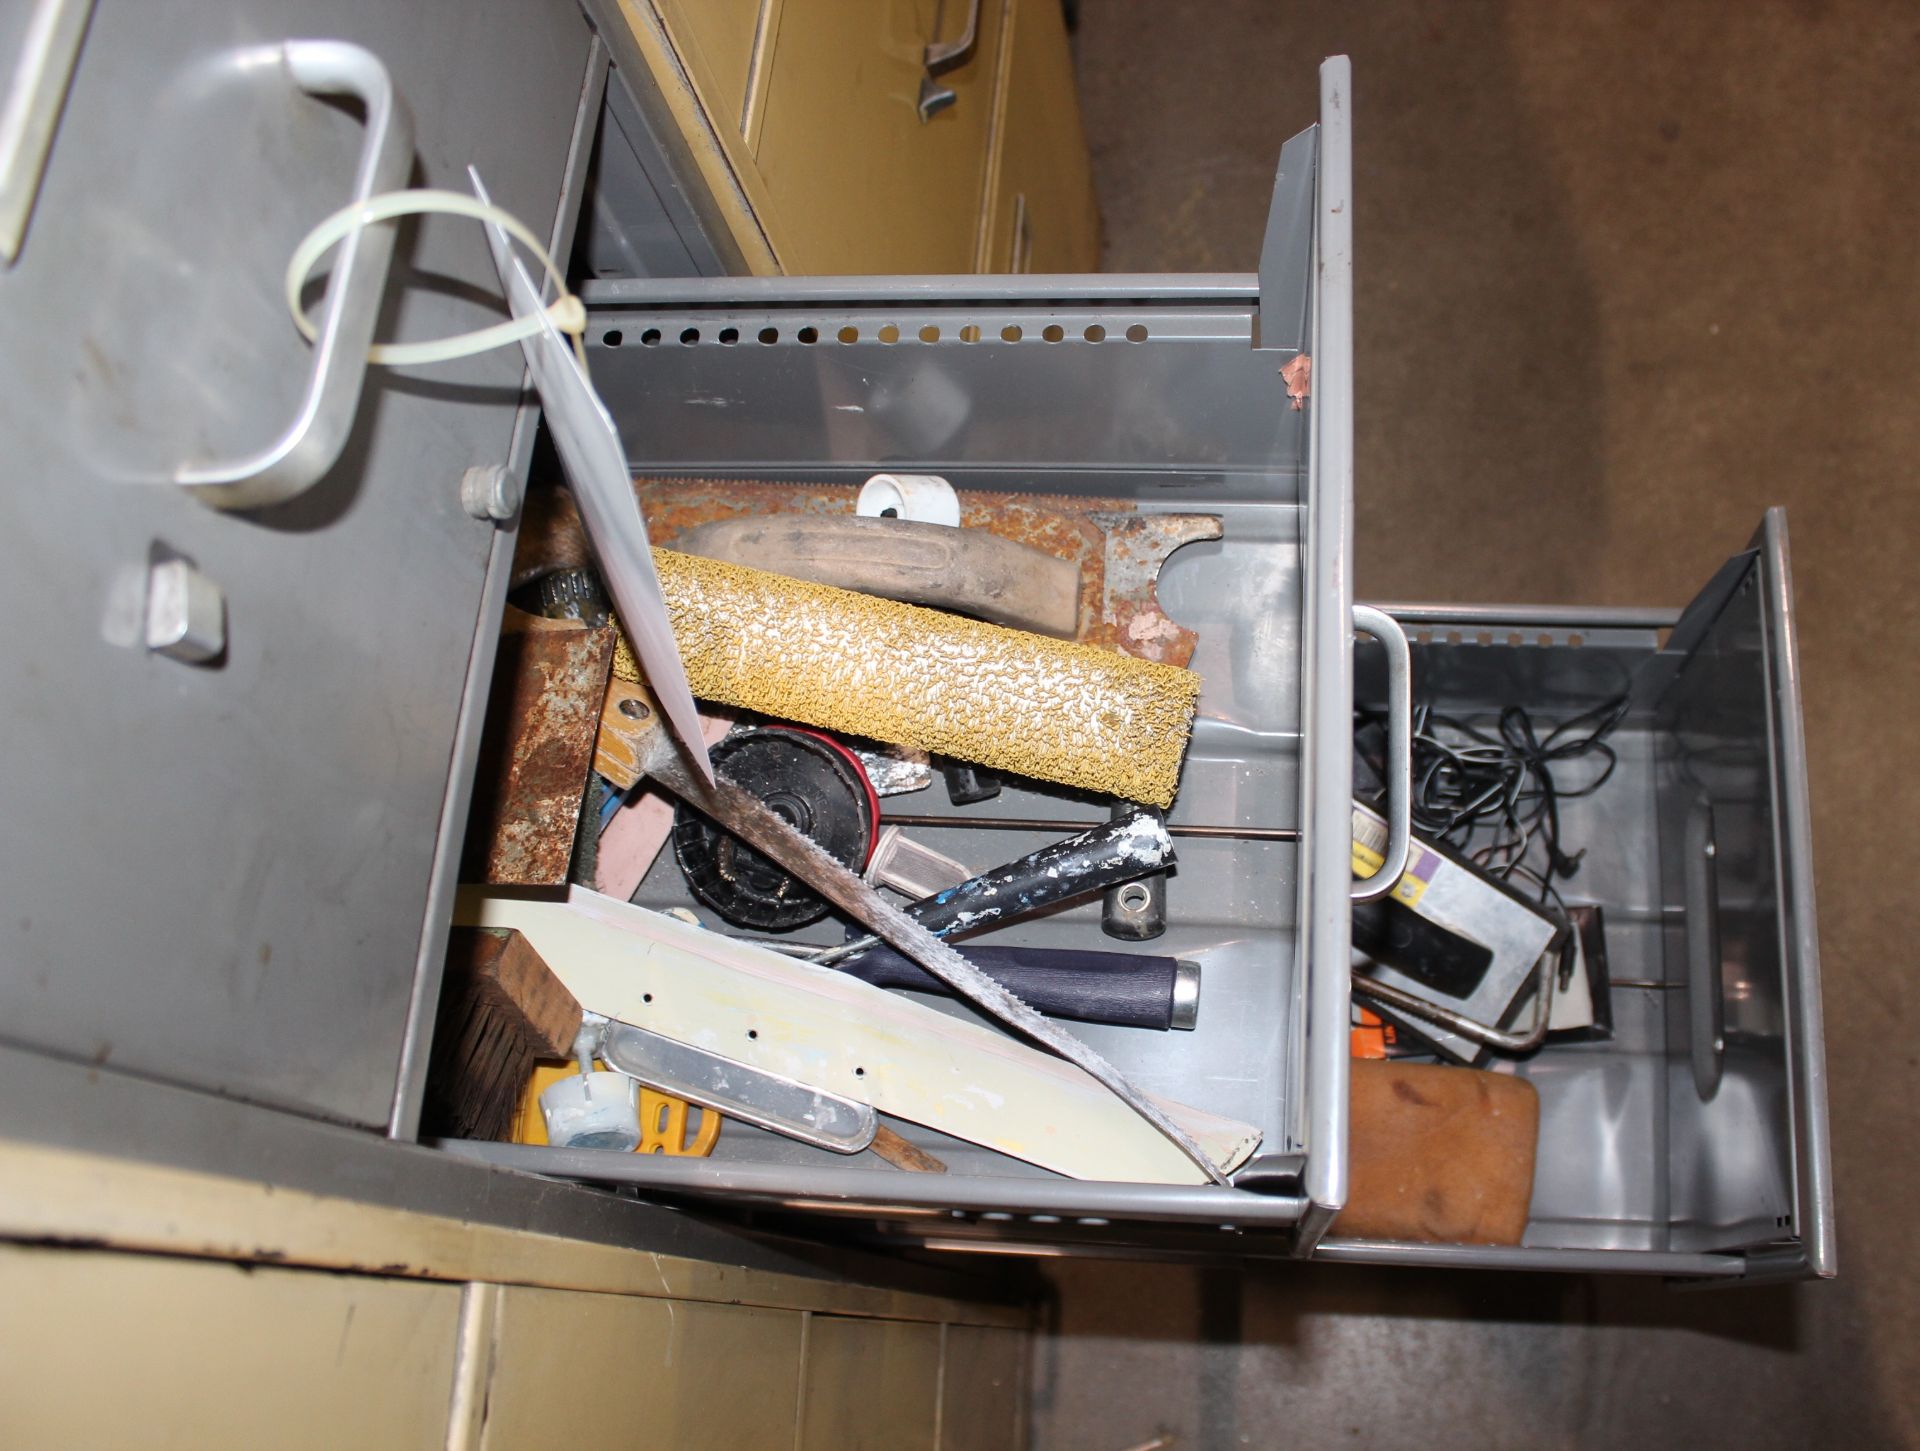 file cabinet and contents - Image 2 of 3